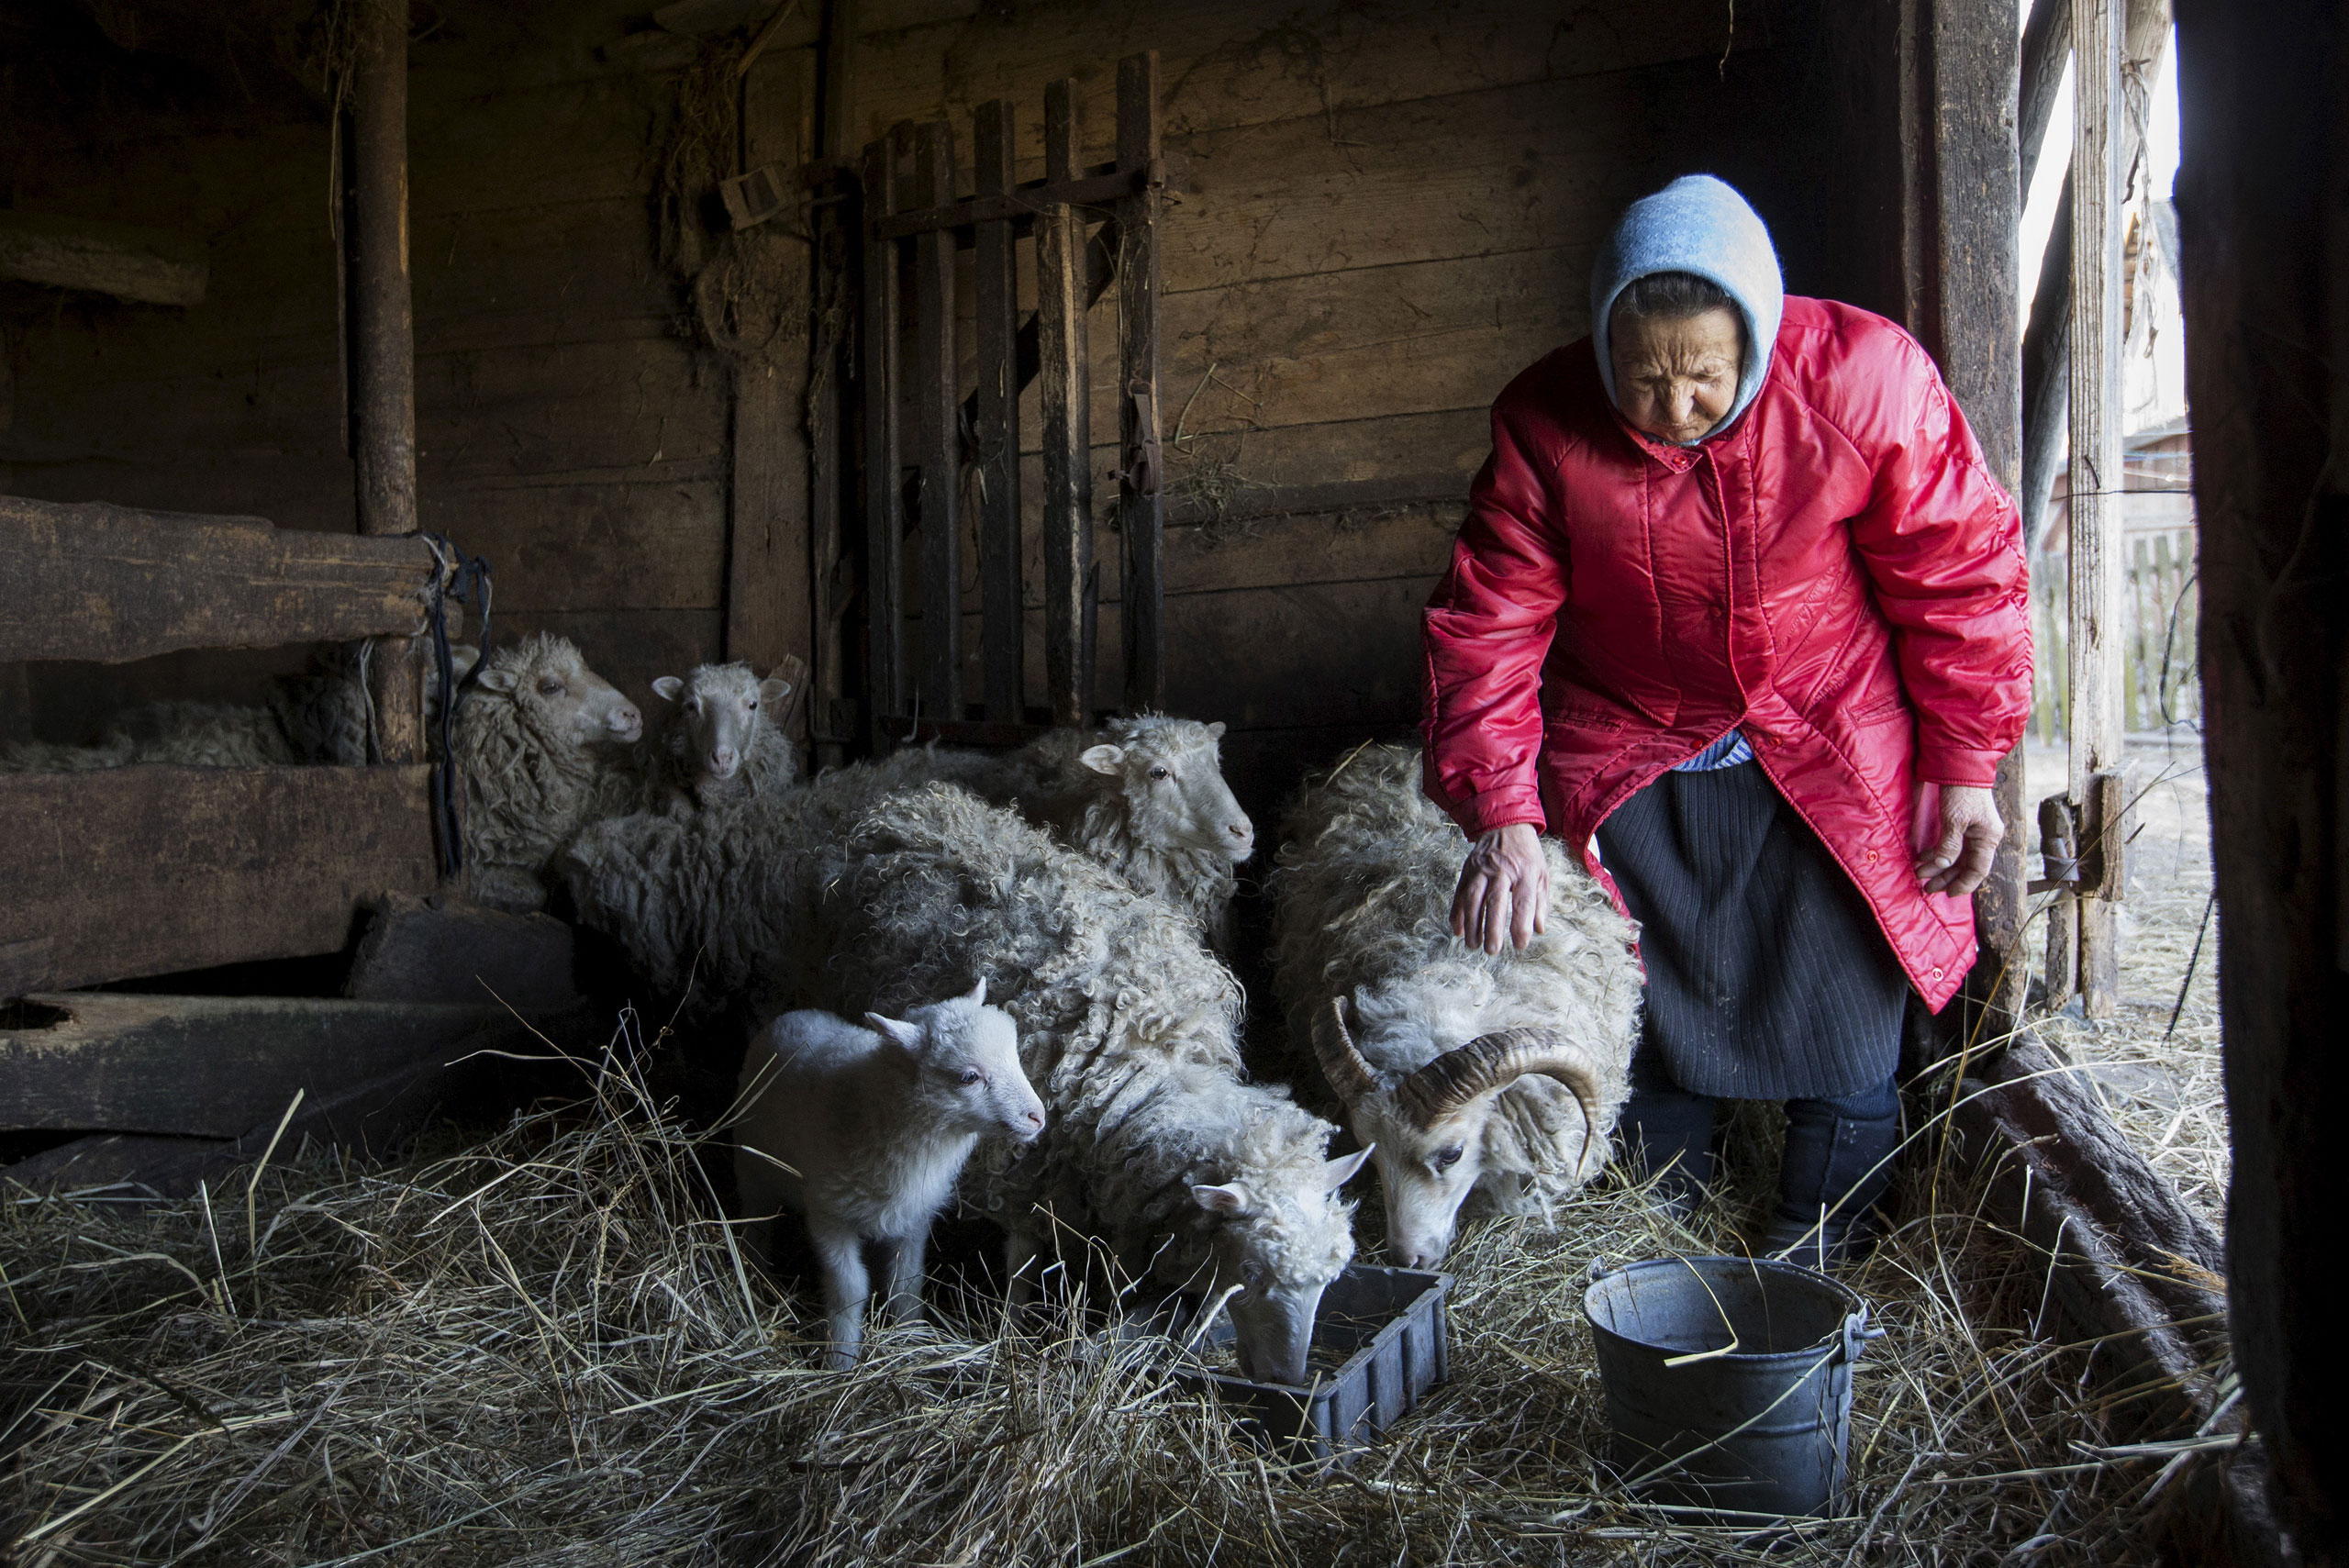 Nastia Pokolo, 74, feeds sheep near her house in the village of Babinets, southwest of the capital Minsk, Belarus, April 17, 2015.